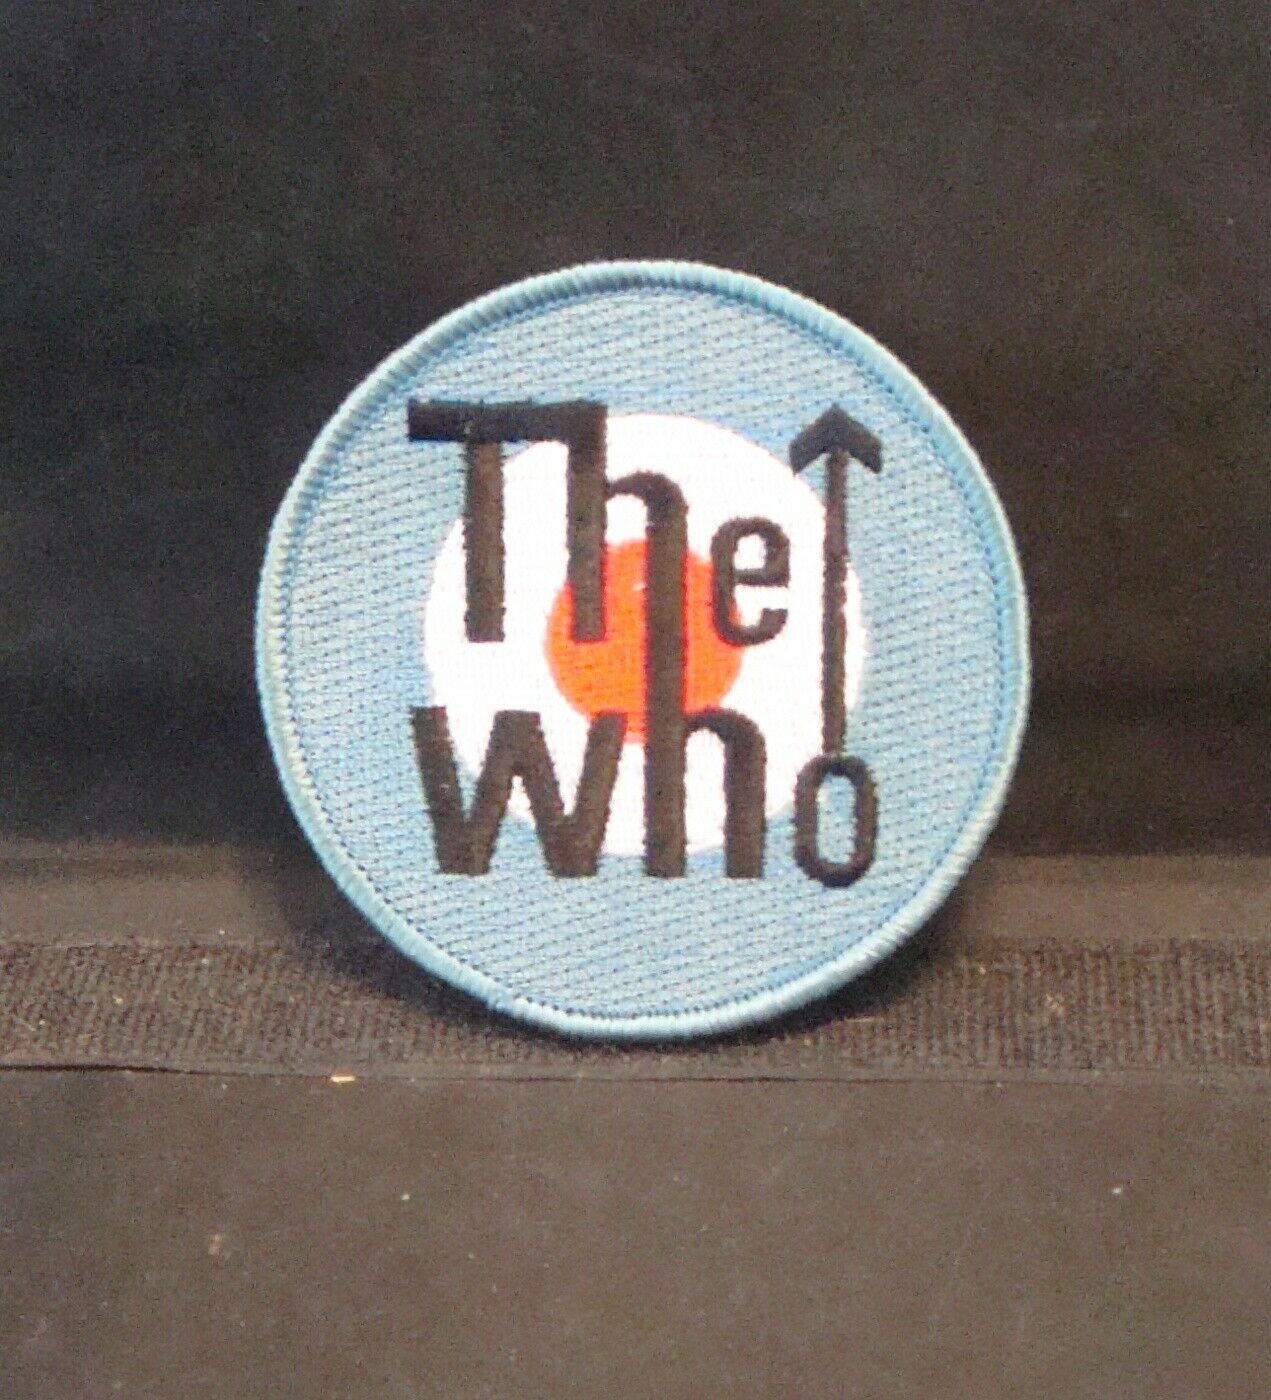 "the Who" Target Embroidered Sew On Patch! 3" Round! Rock & Roll! Unused! Wow!